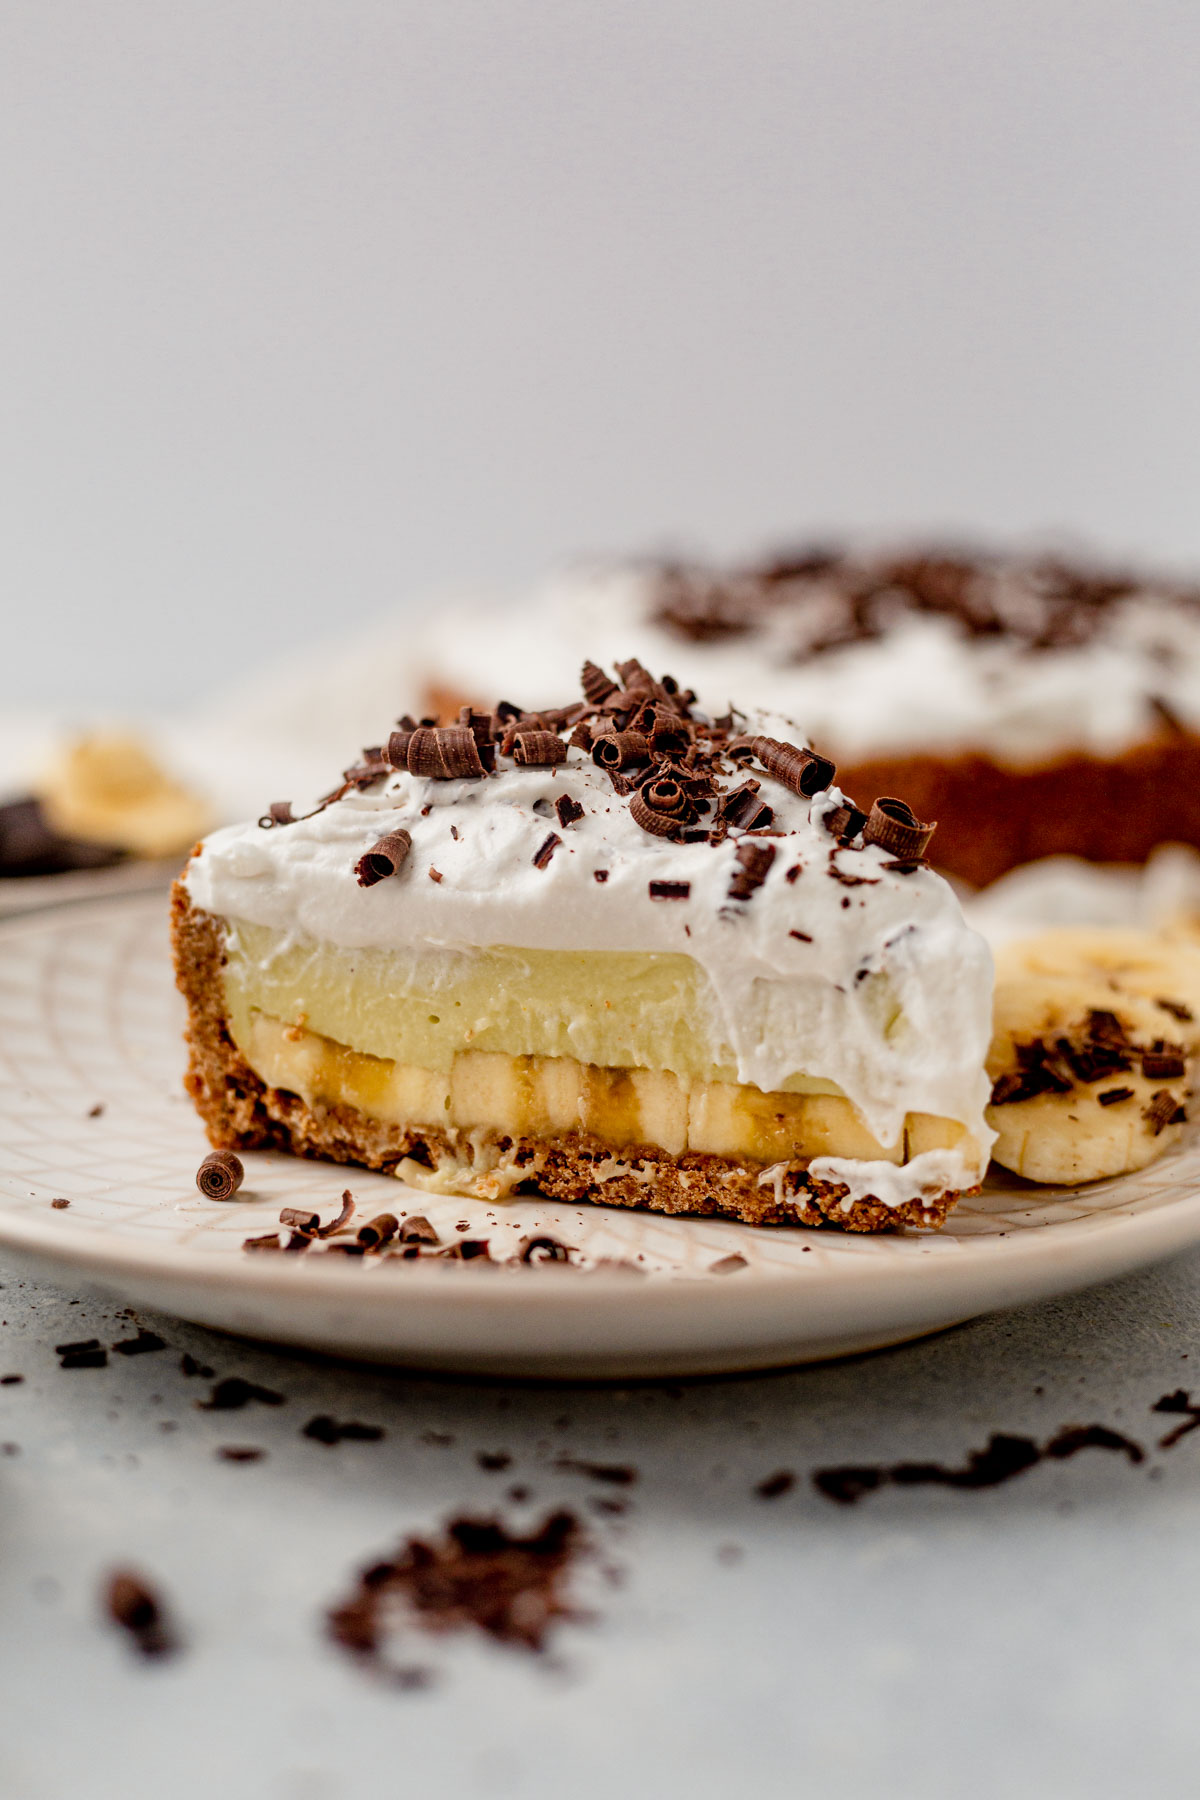 a slice of banana cream pie on a plate with chocolate shavings